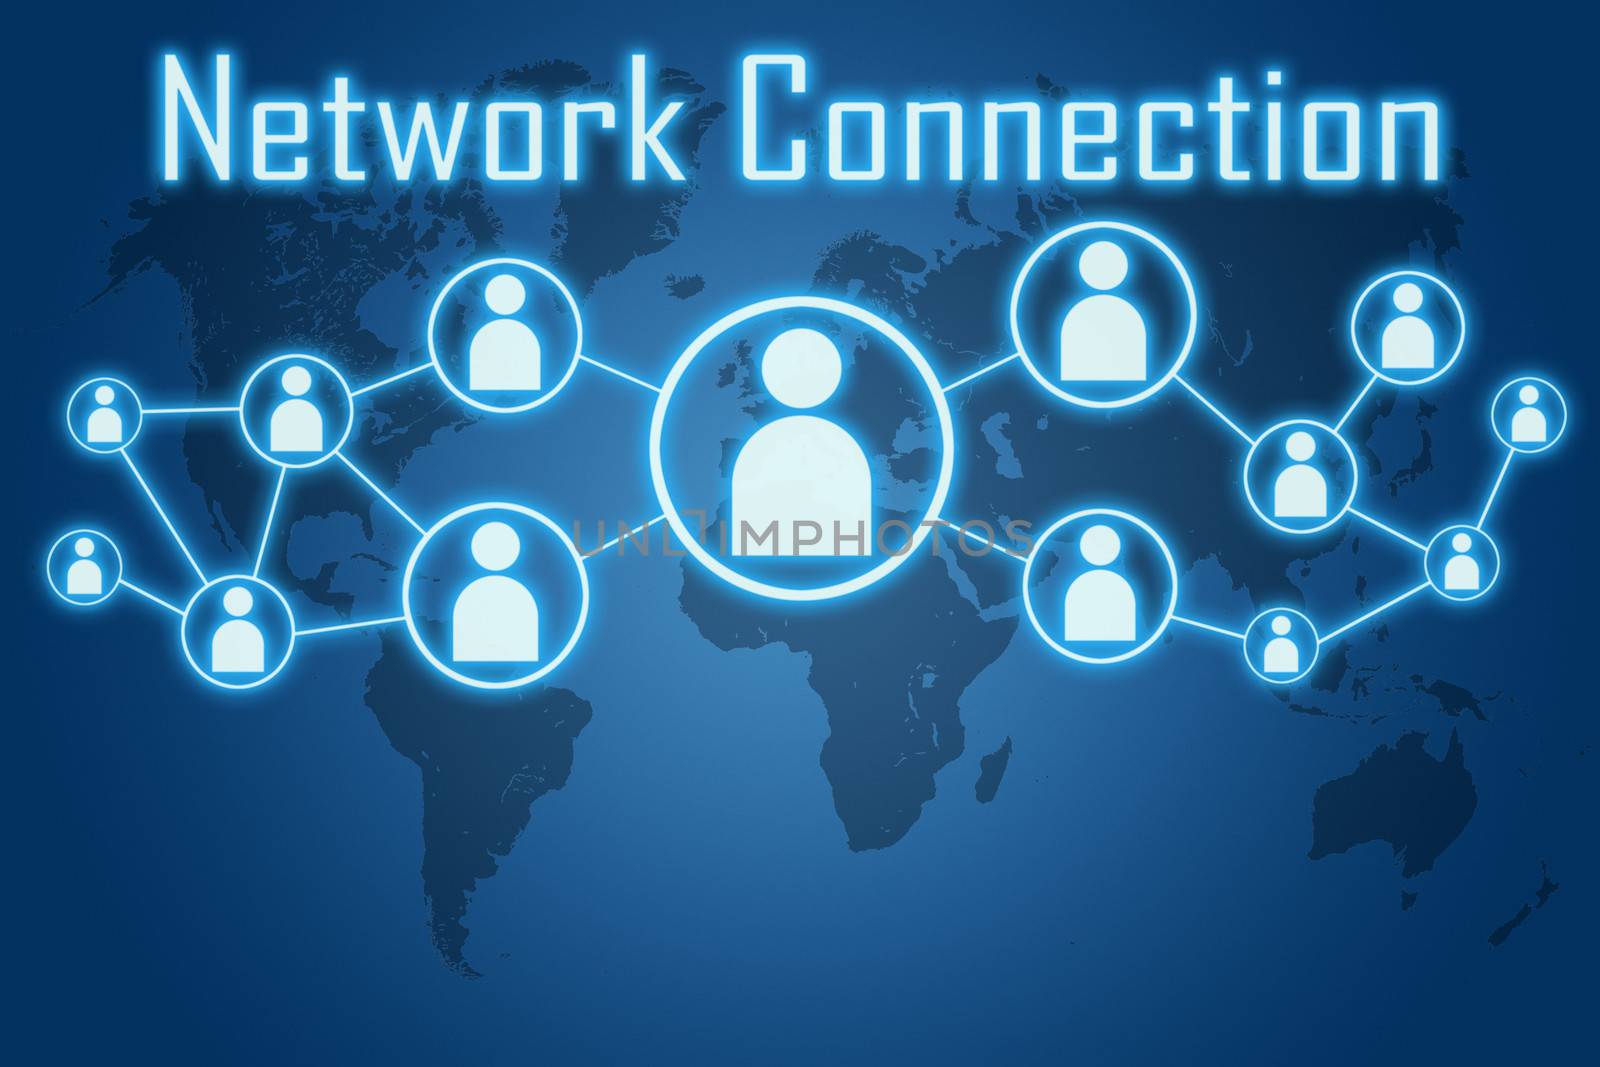 network connection concept on blue background with world map